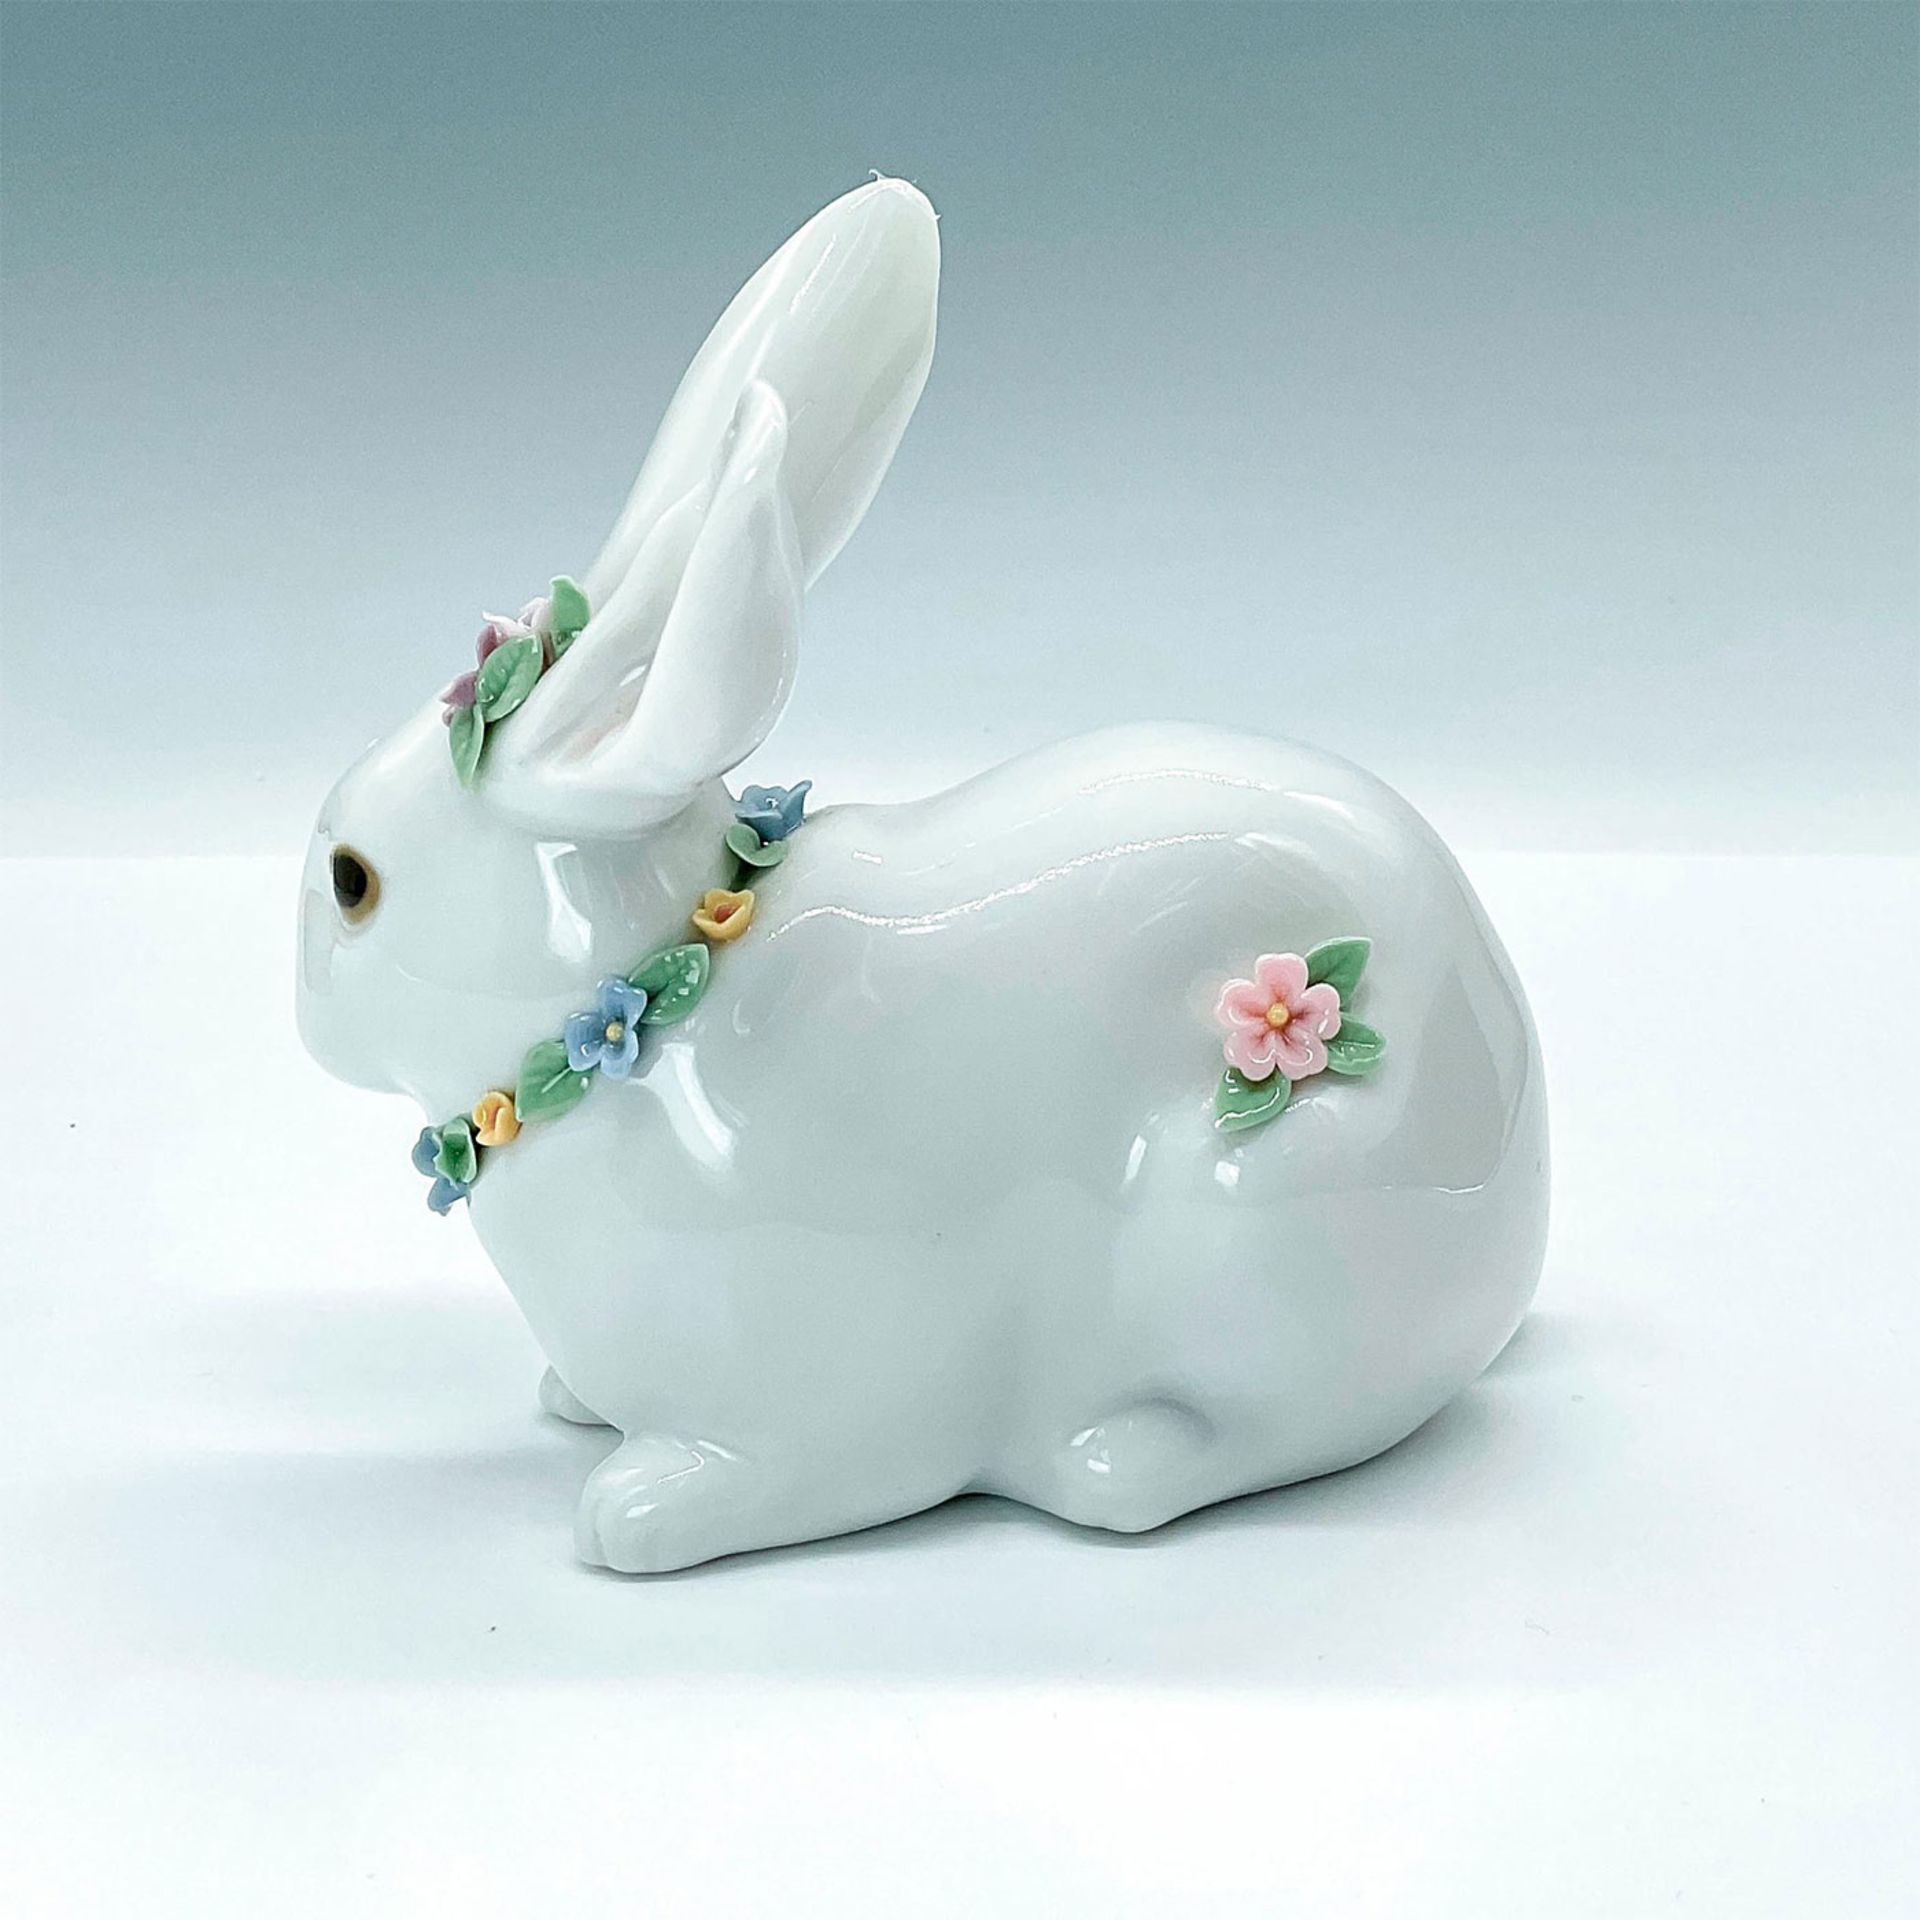 Attentive Bunny With Flowers 1006098 - Lladro Porcelain Figurine - Image 2 of 3